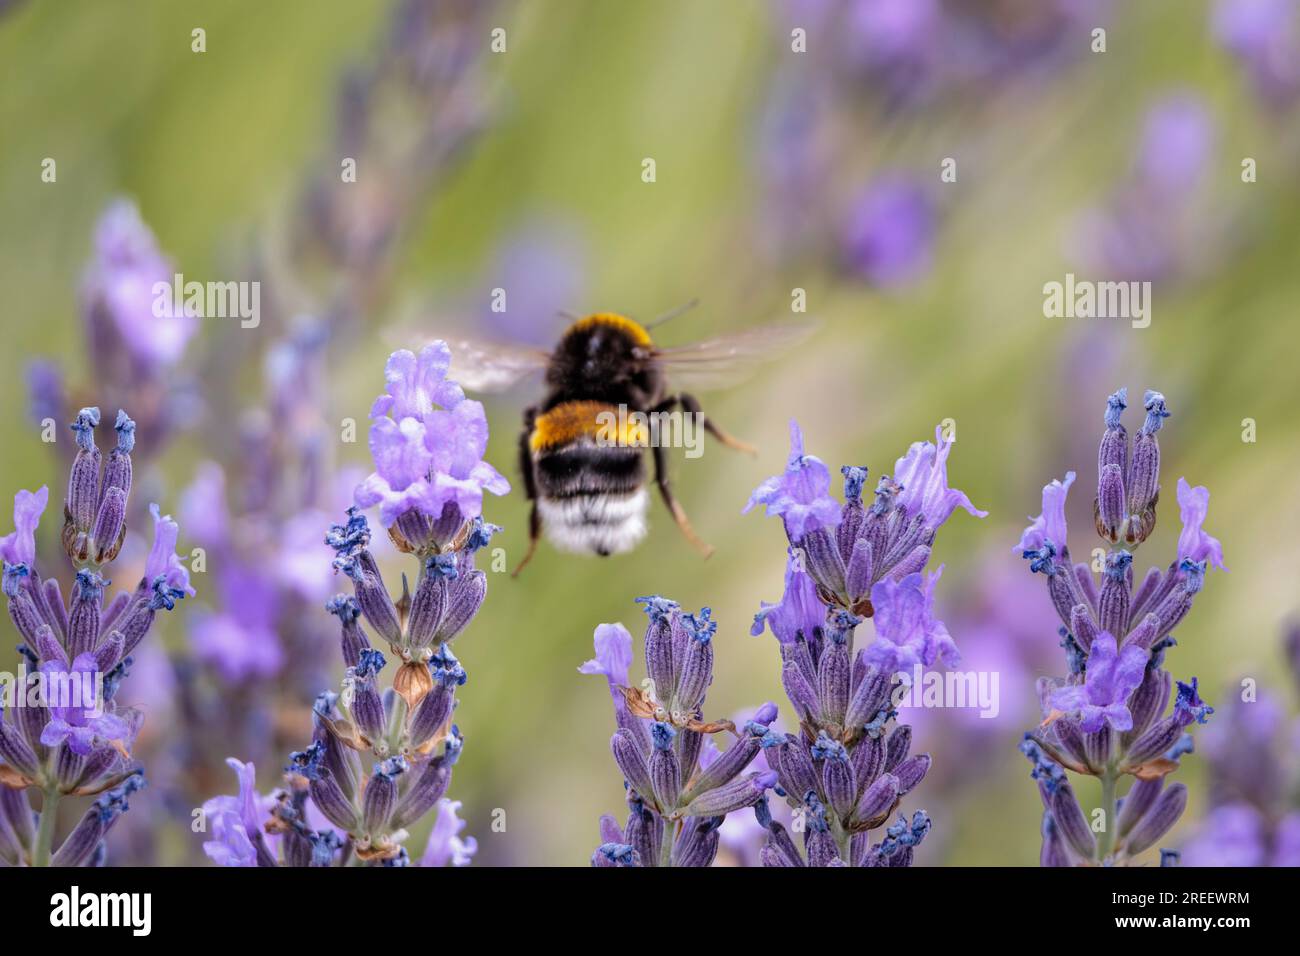 Lavender blossoms (Lavandula angustifolia) with a satiated bumblebee flying away Stock Photo